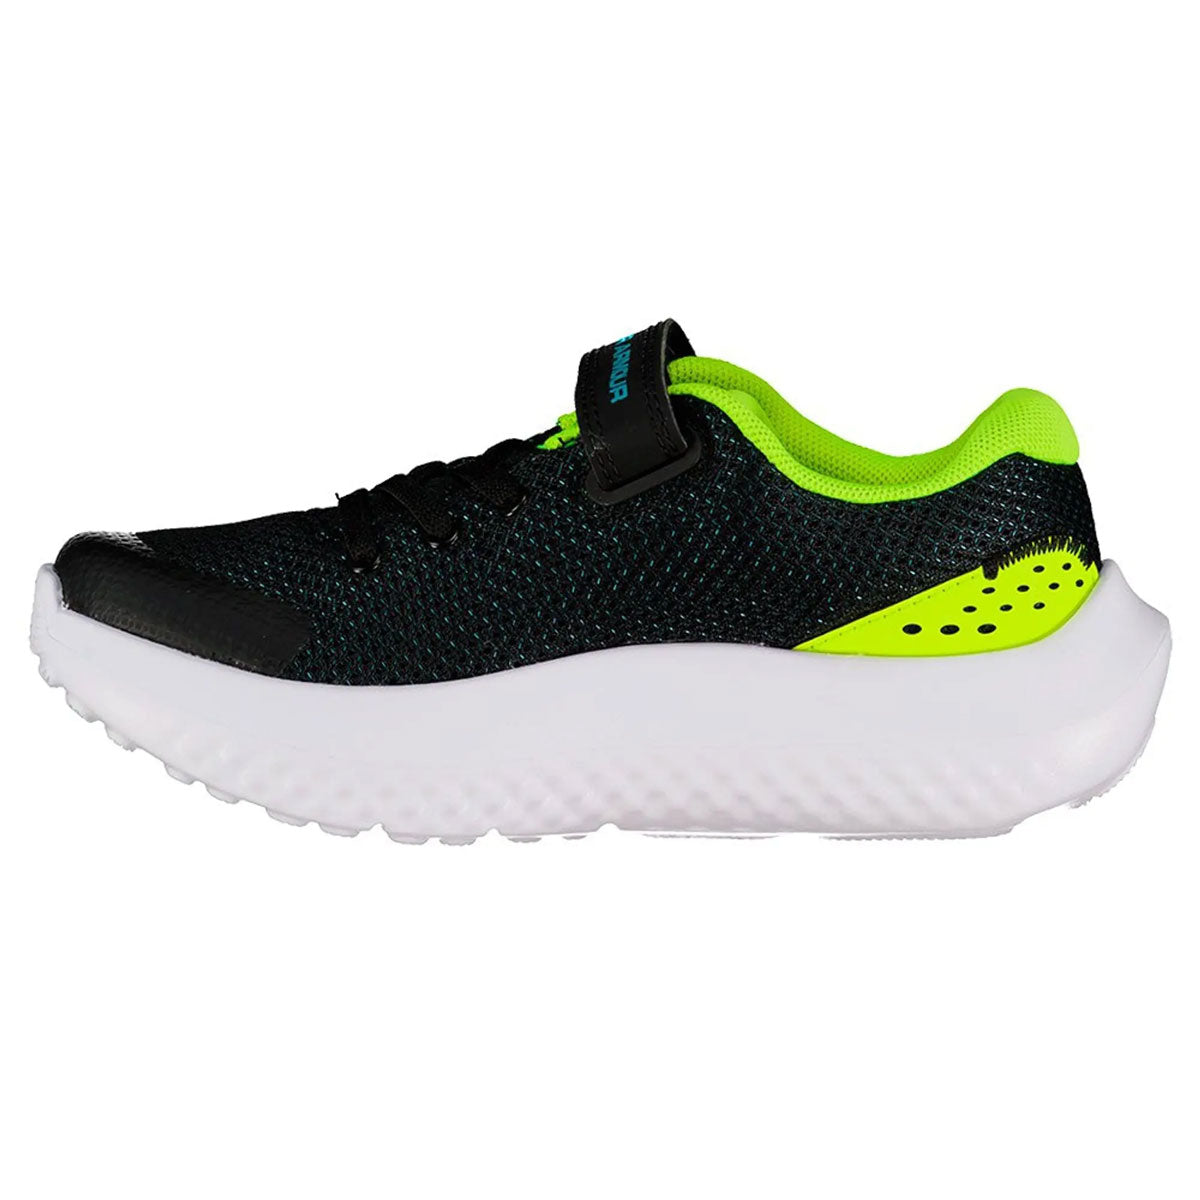 Under Armour BPS Surge 4 AC Running Shoes - Boys - Black/High Vis Yellow/Circuit Teal